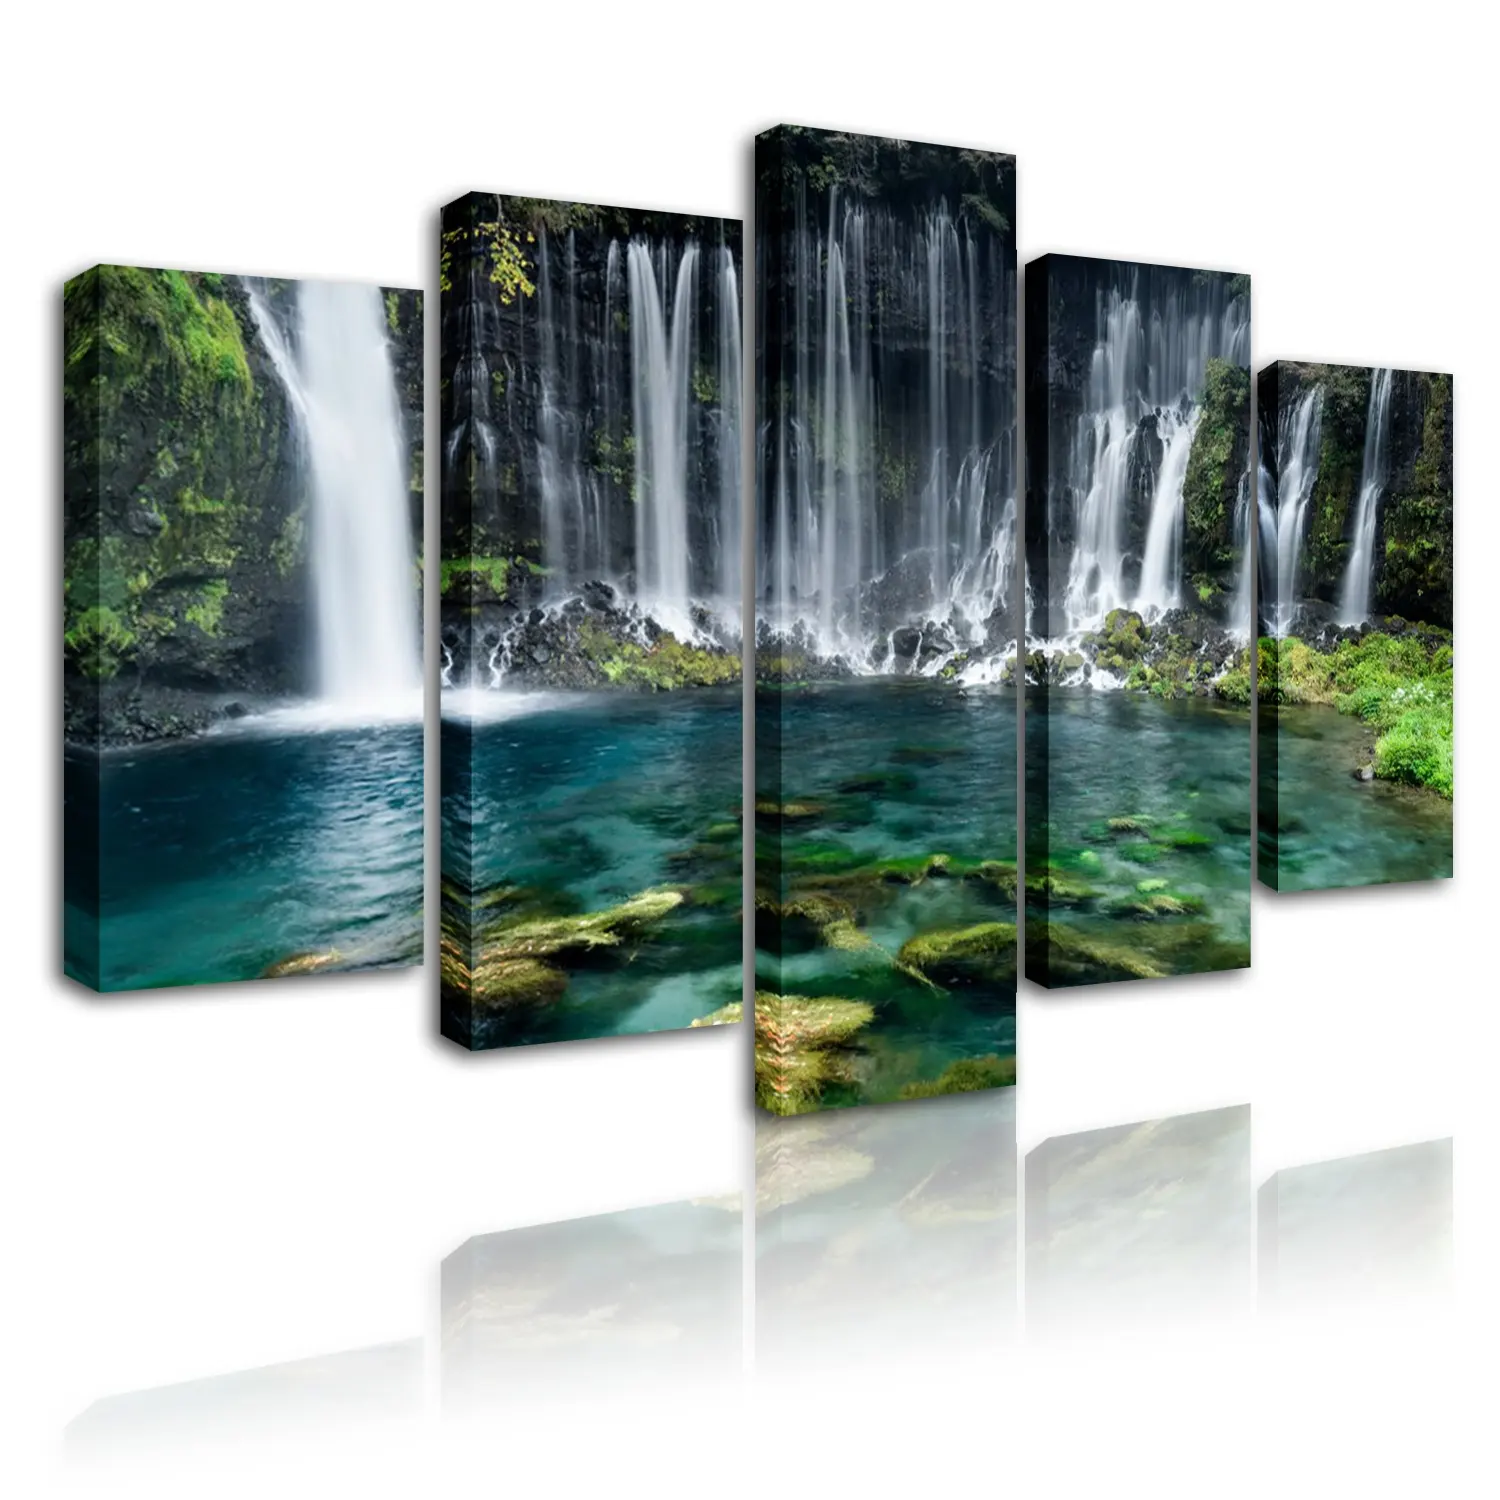 5 Panel Canvas Printing Landscape Art/Customized Digital Photography PrintingCheap Canvas Painting for Home decoration